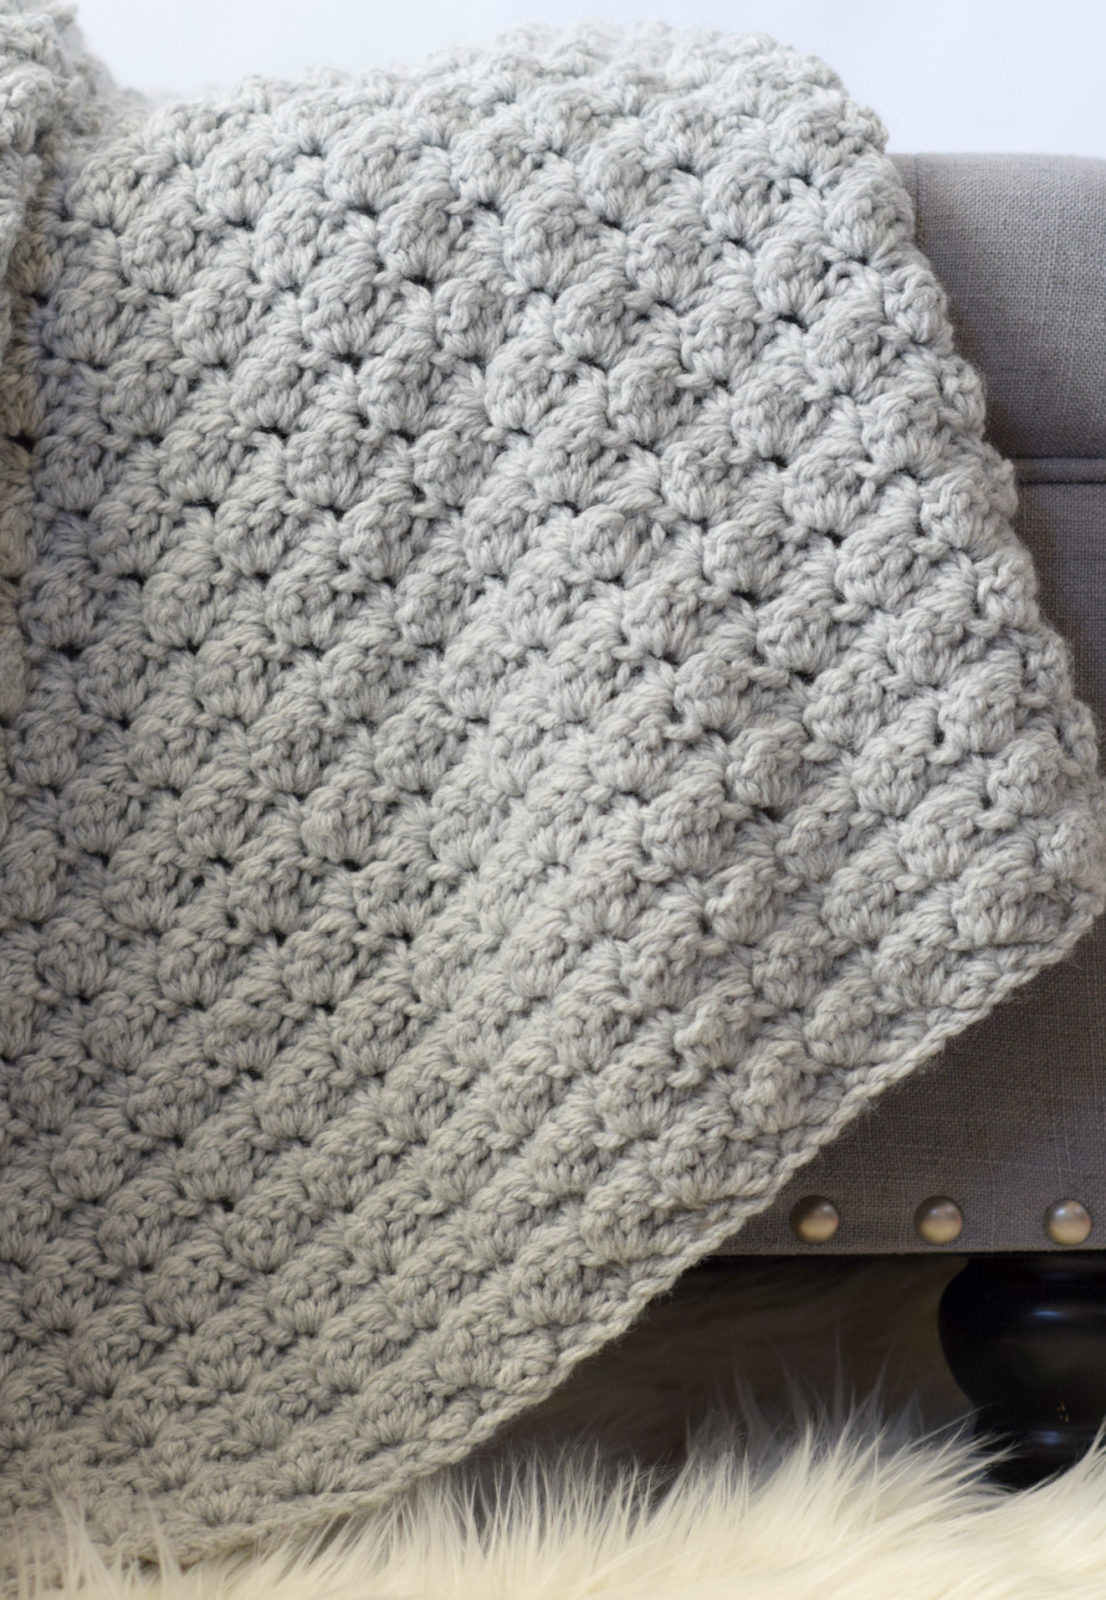 Easy Afghan Crochet Pattern Simple Crocheted Blanket Go To Pattern Mama In A Stitch